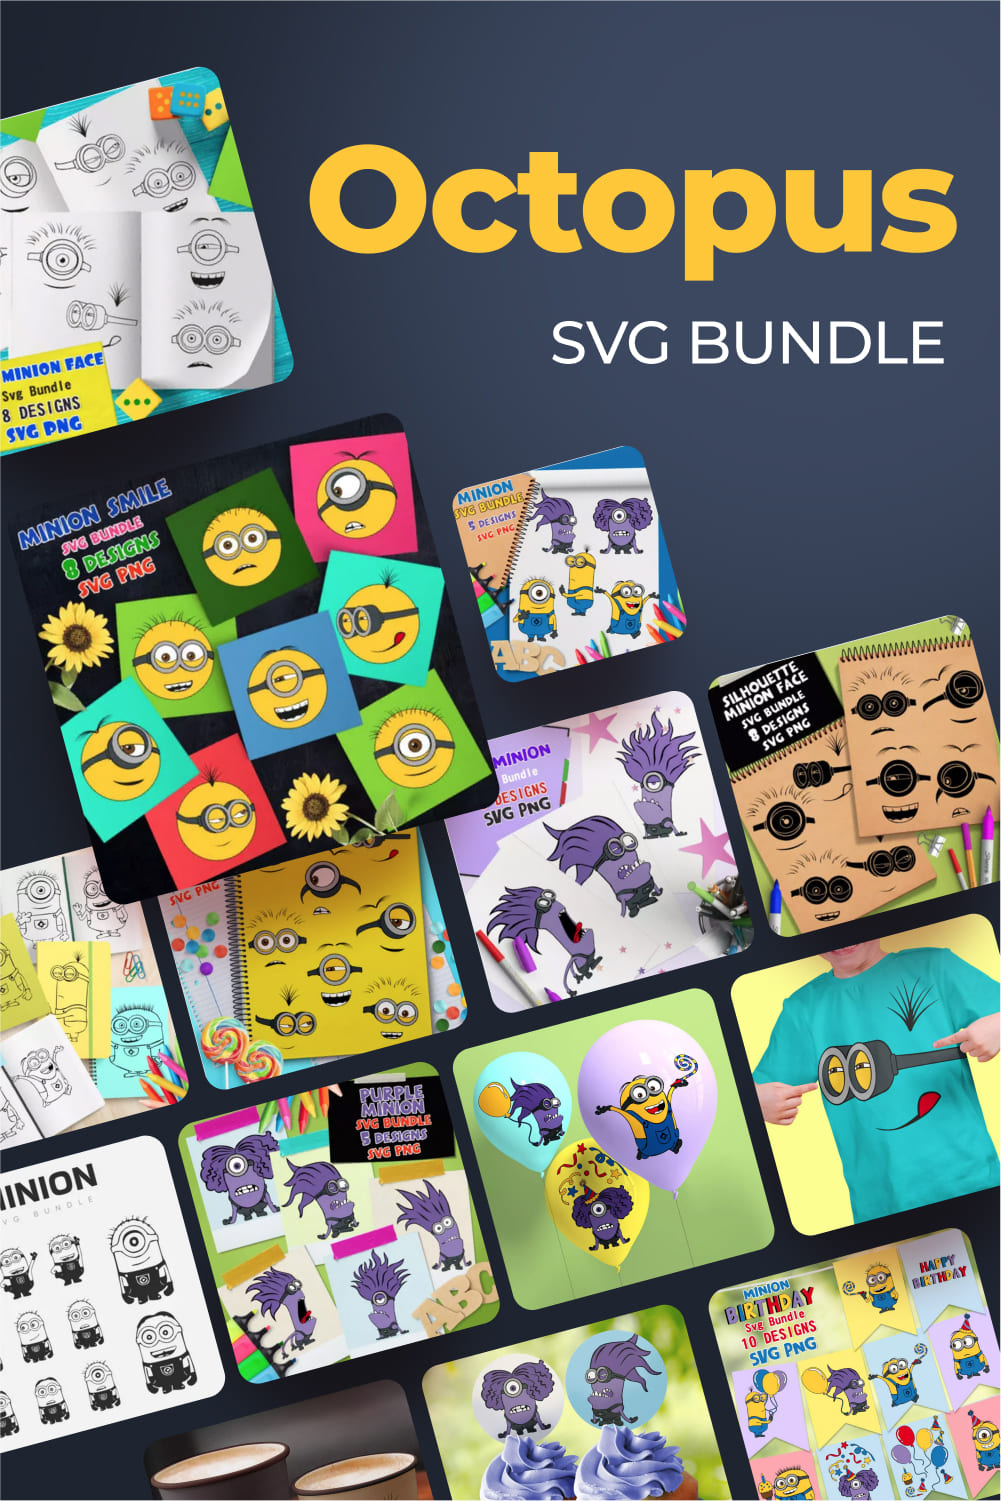 The octopus svg bundle includes a variety of items.